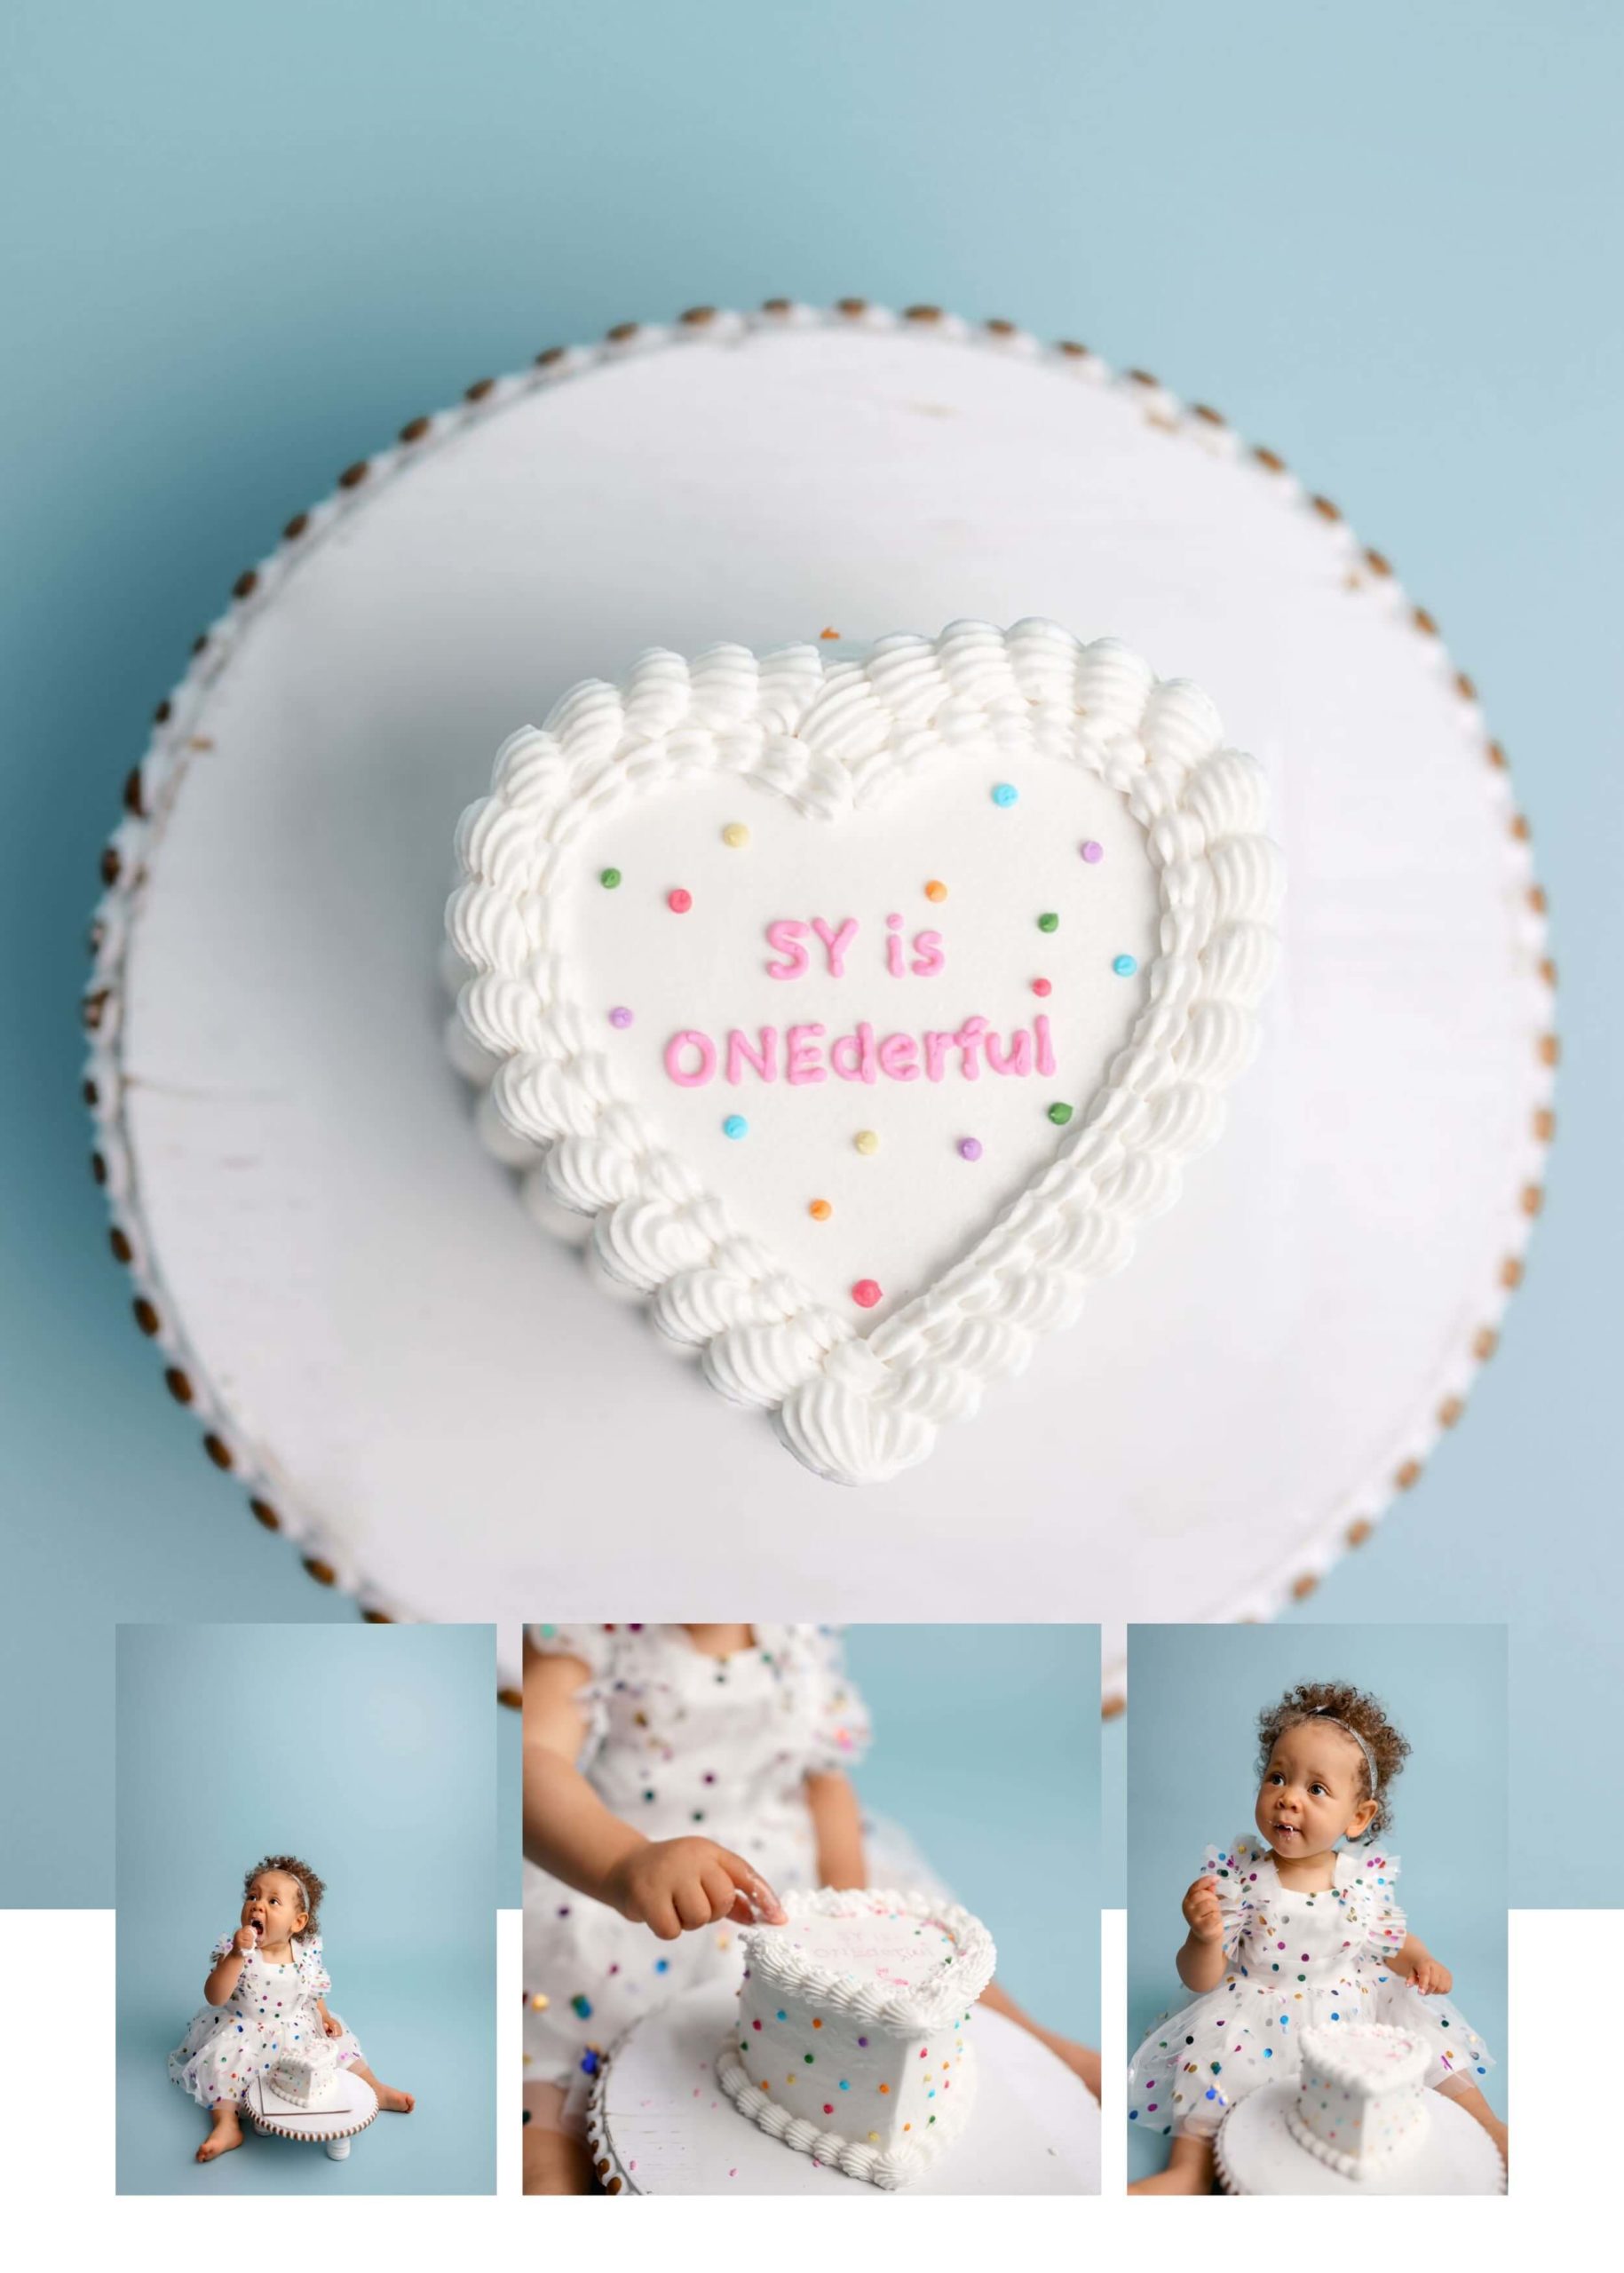 It's a ONEderful Heart shaped Cake especially made for these La Mesa Studio Cake Smash Pictures